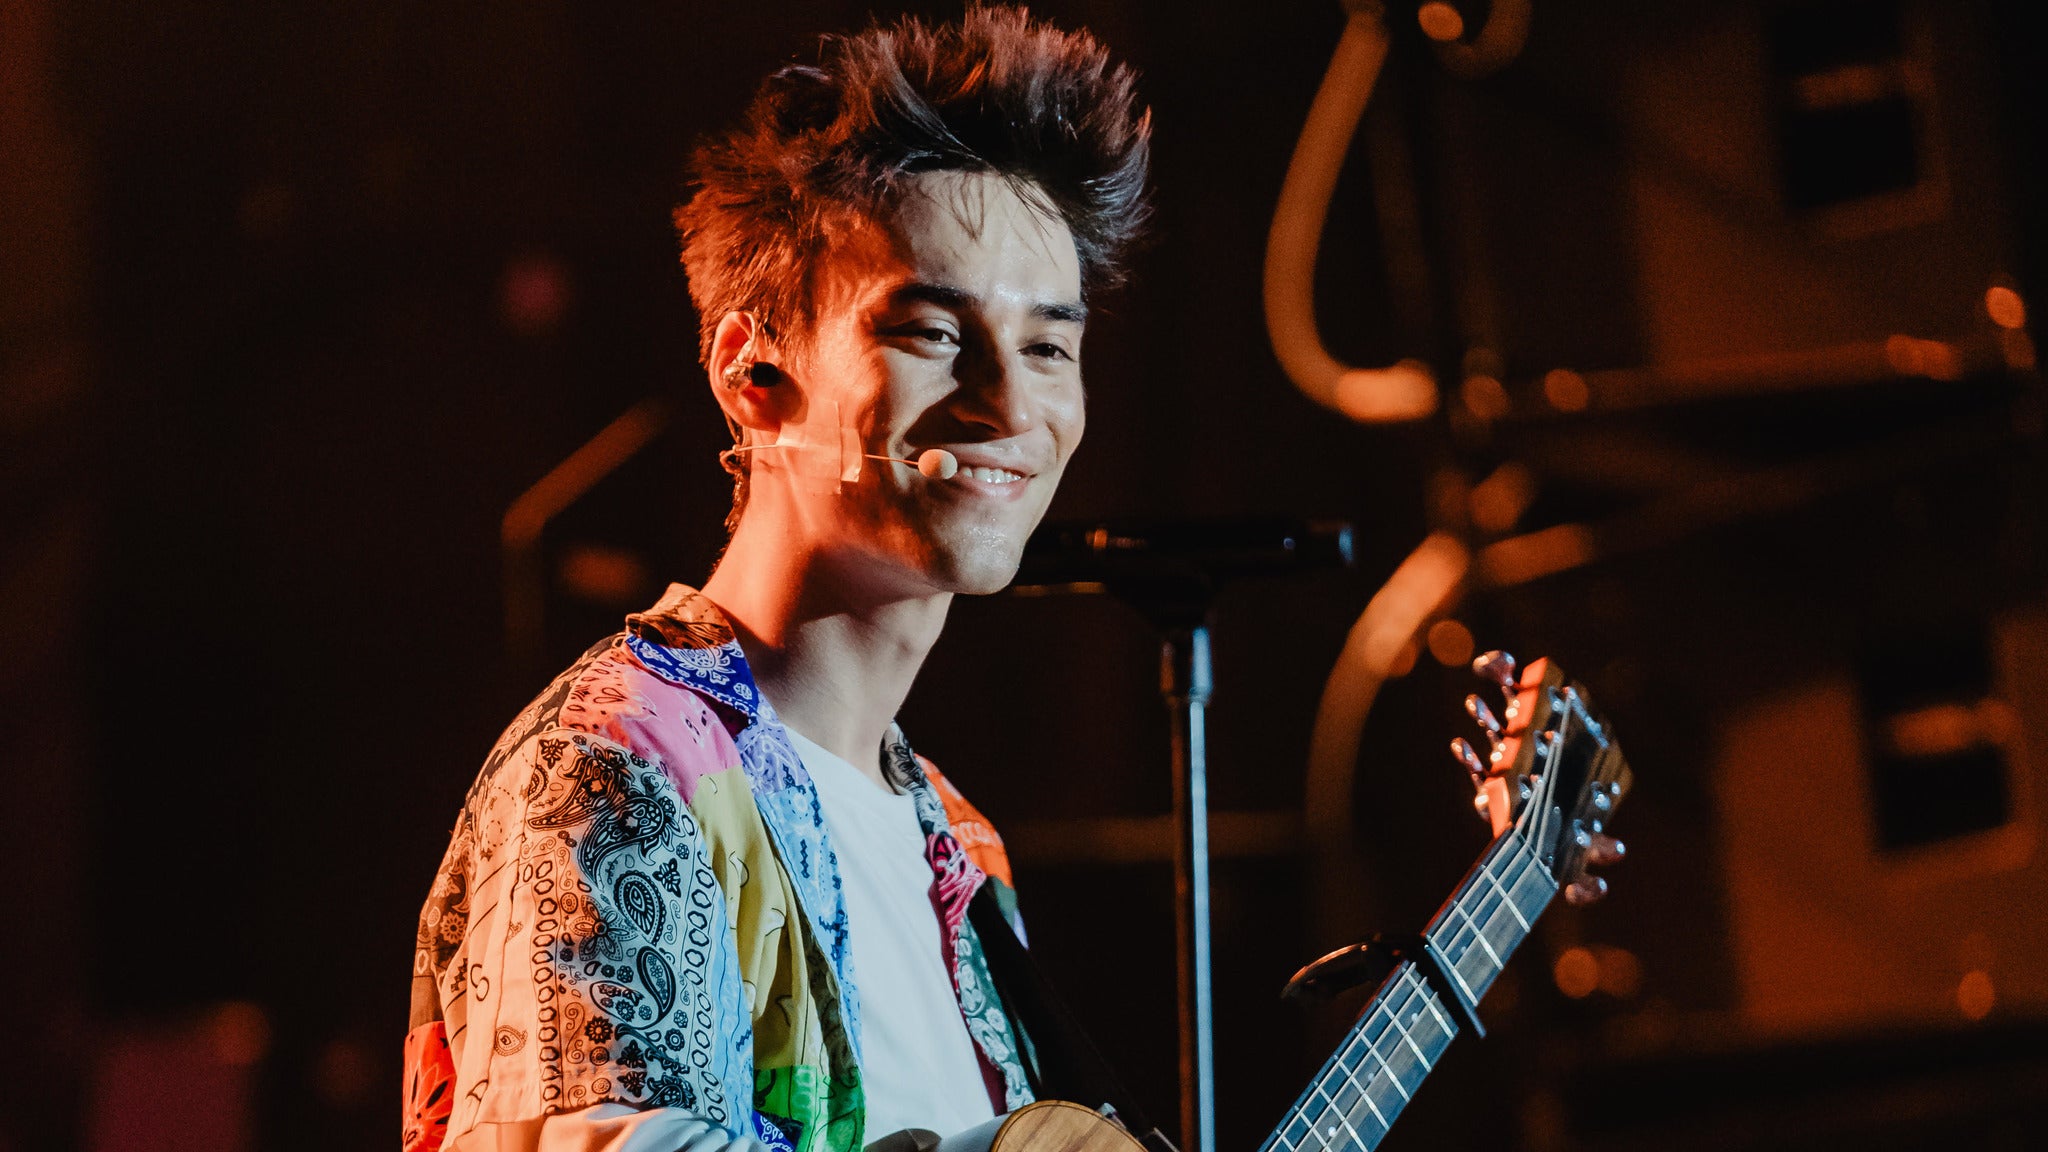 Image used with permission from Ticketmaster | JACOB COLLIER - DJESSE WORLD TOUR 2022 tickets